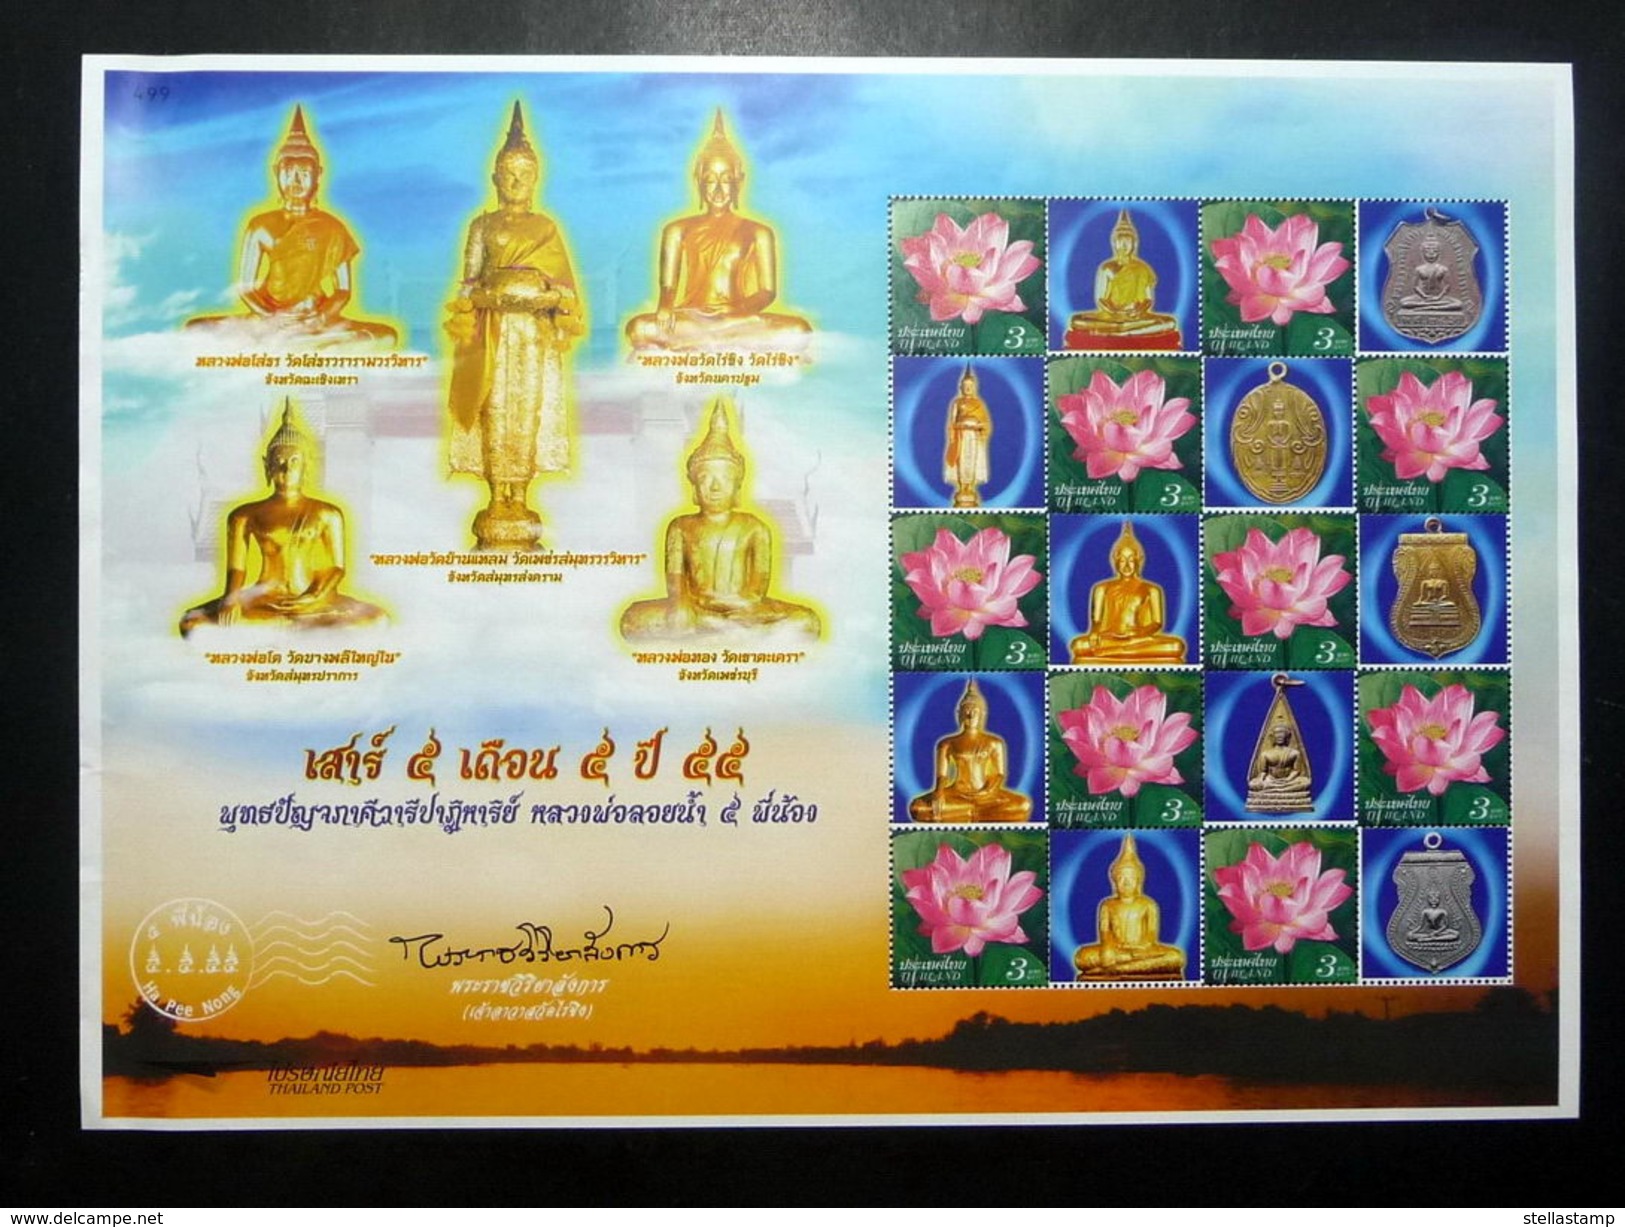 Thailand Stamp Personalized 2012 The Quinary Highly-revered Buddha Image - The Legend Of Floating Buddha #1 - Thailand